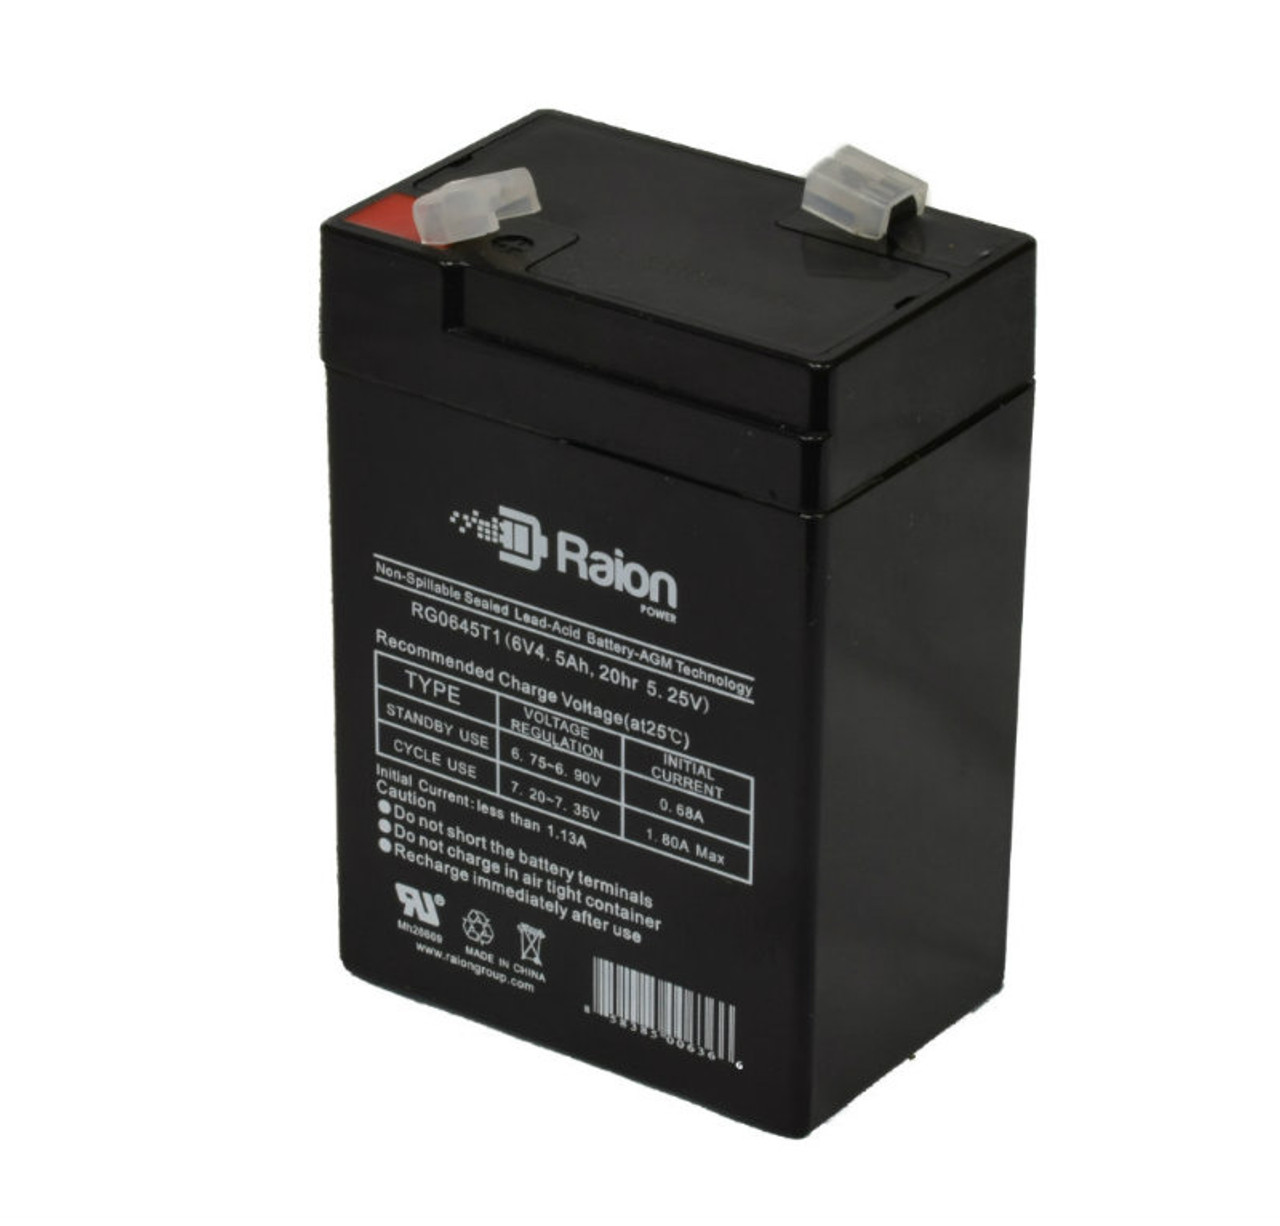 Raion Power RG0645T1 6V 4.5Ah Replacement Battery Cartridge for Lithonia ELM Series